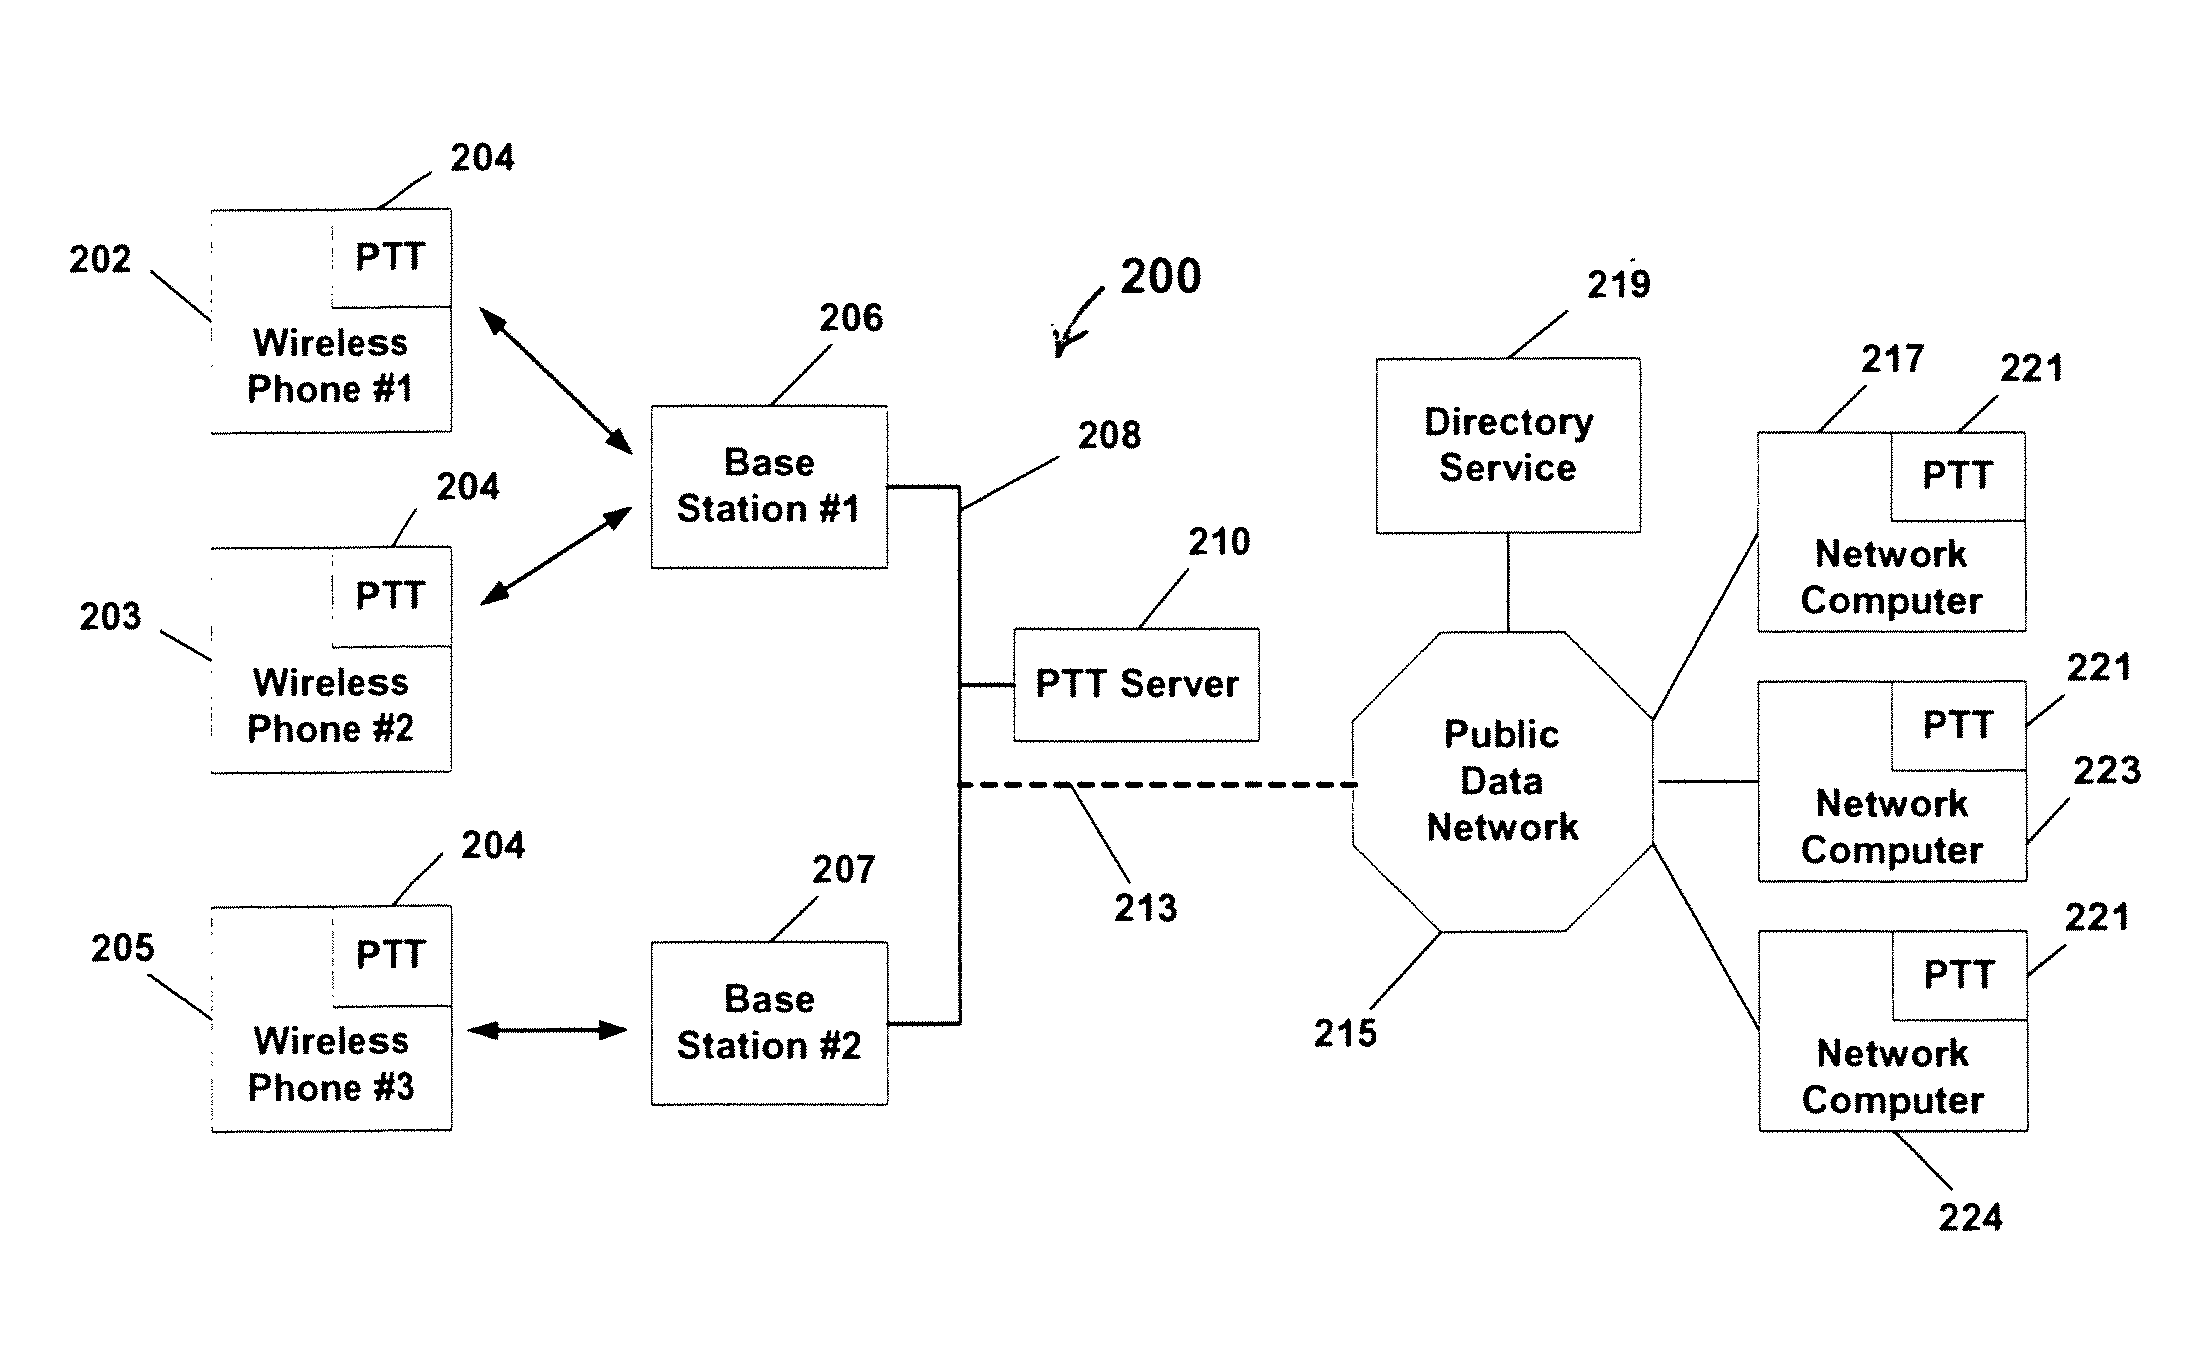 Method and apparatus for accessing a network computer to establish a push-to-talk session